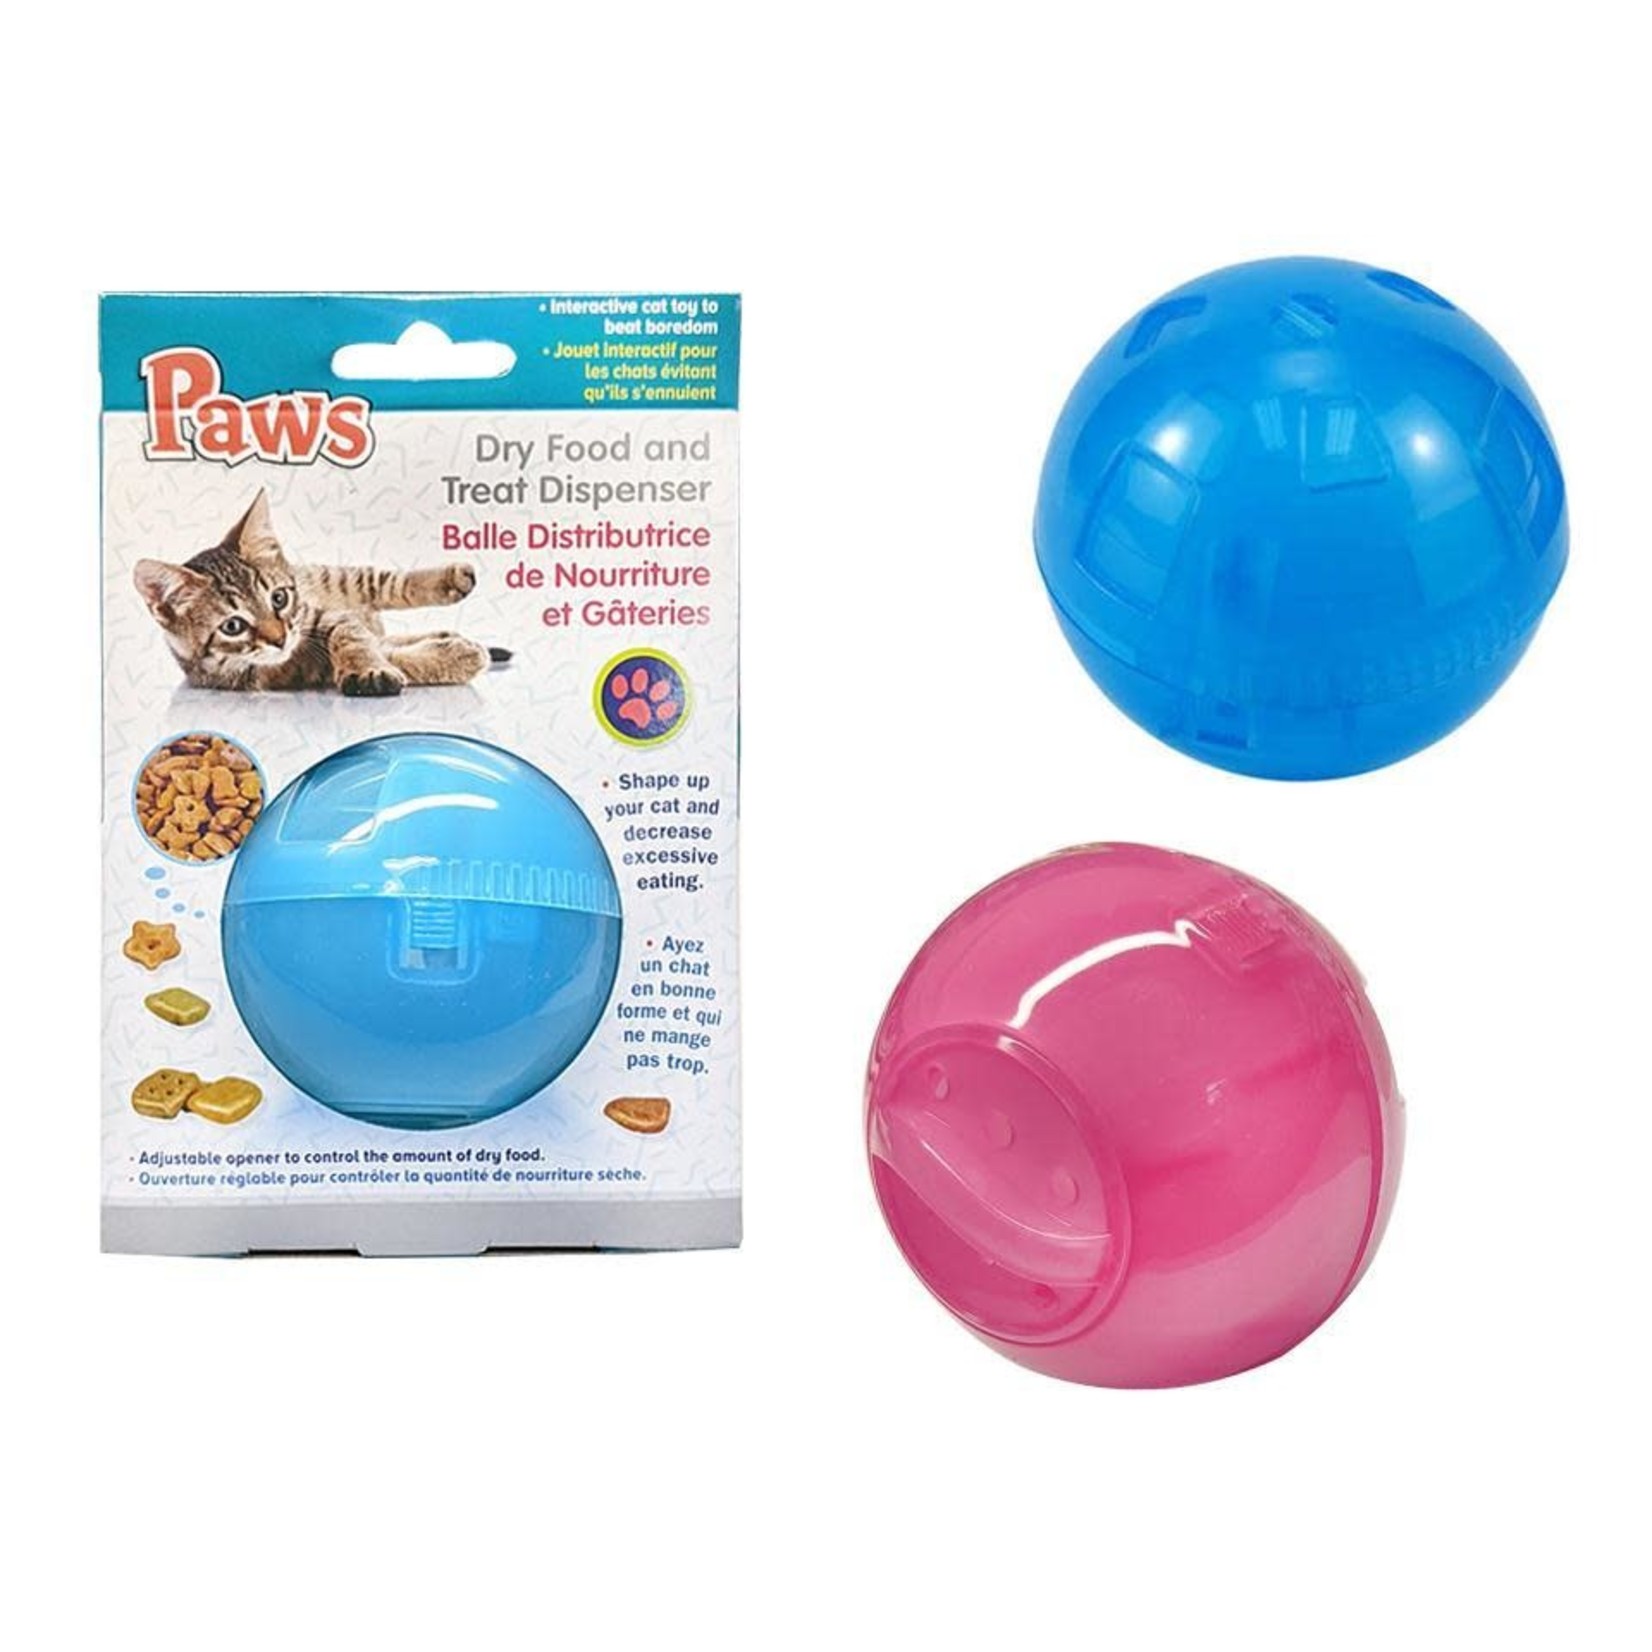 PAWS* DRY FOOD AND TREAT DISPENSER